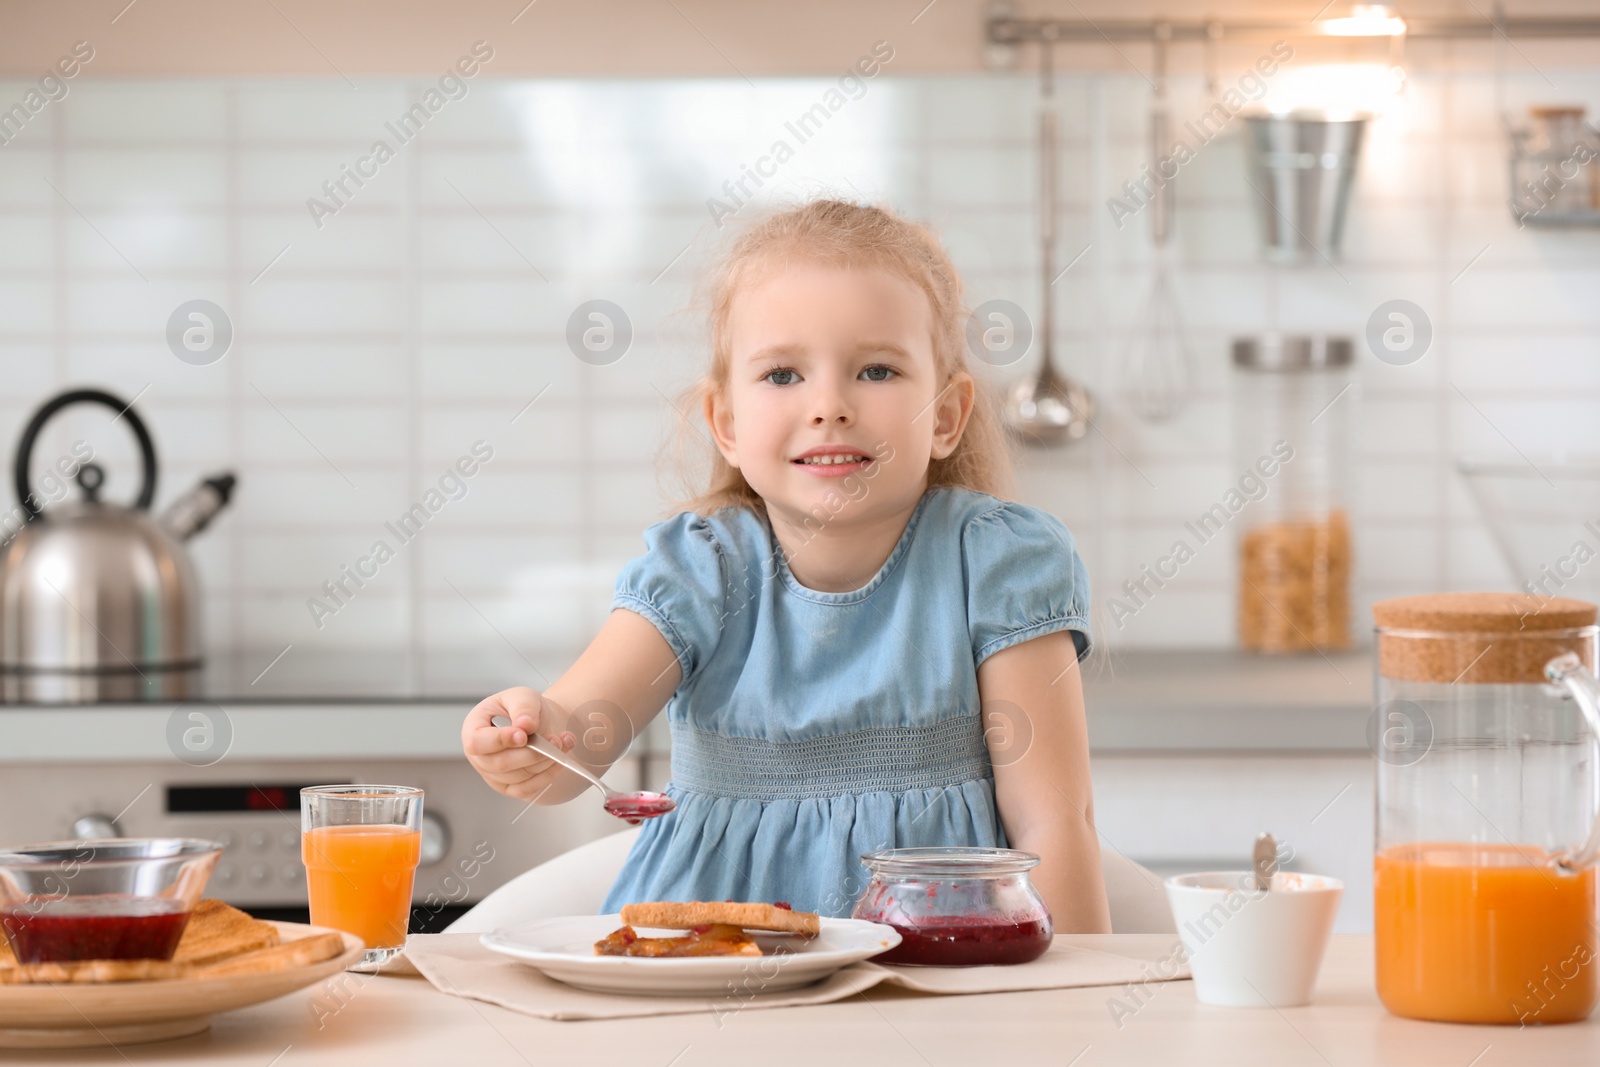 Photo of Cute little girl spreading jam onto tasty toasted bread at table in kitchen